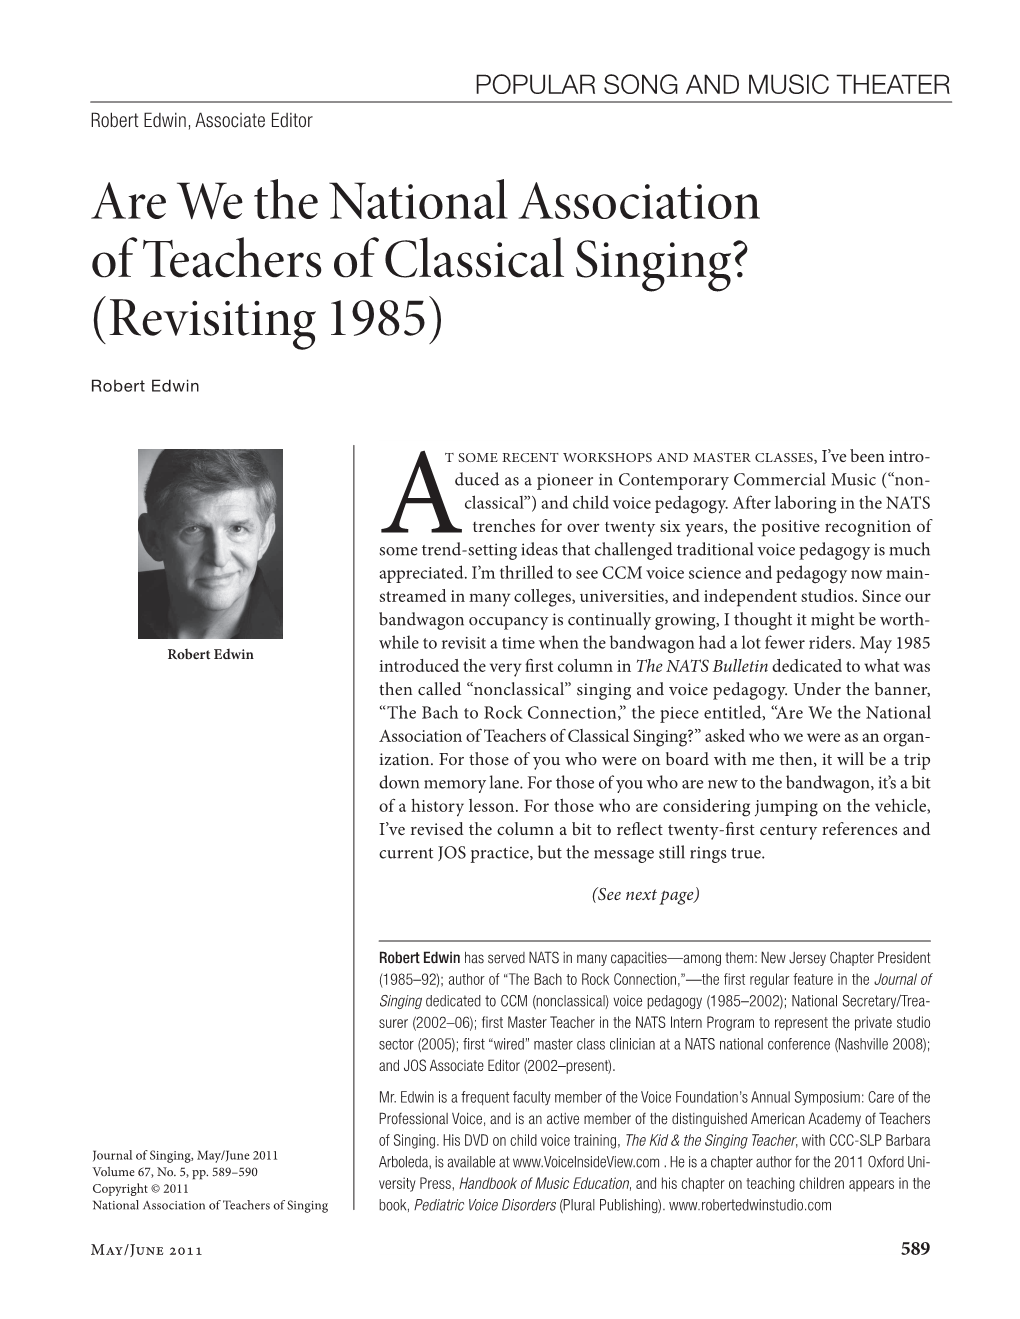 Are We the National Association of Teachers of Classical Singing? (Revisiting 1985)